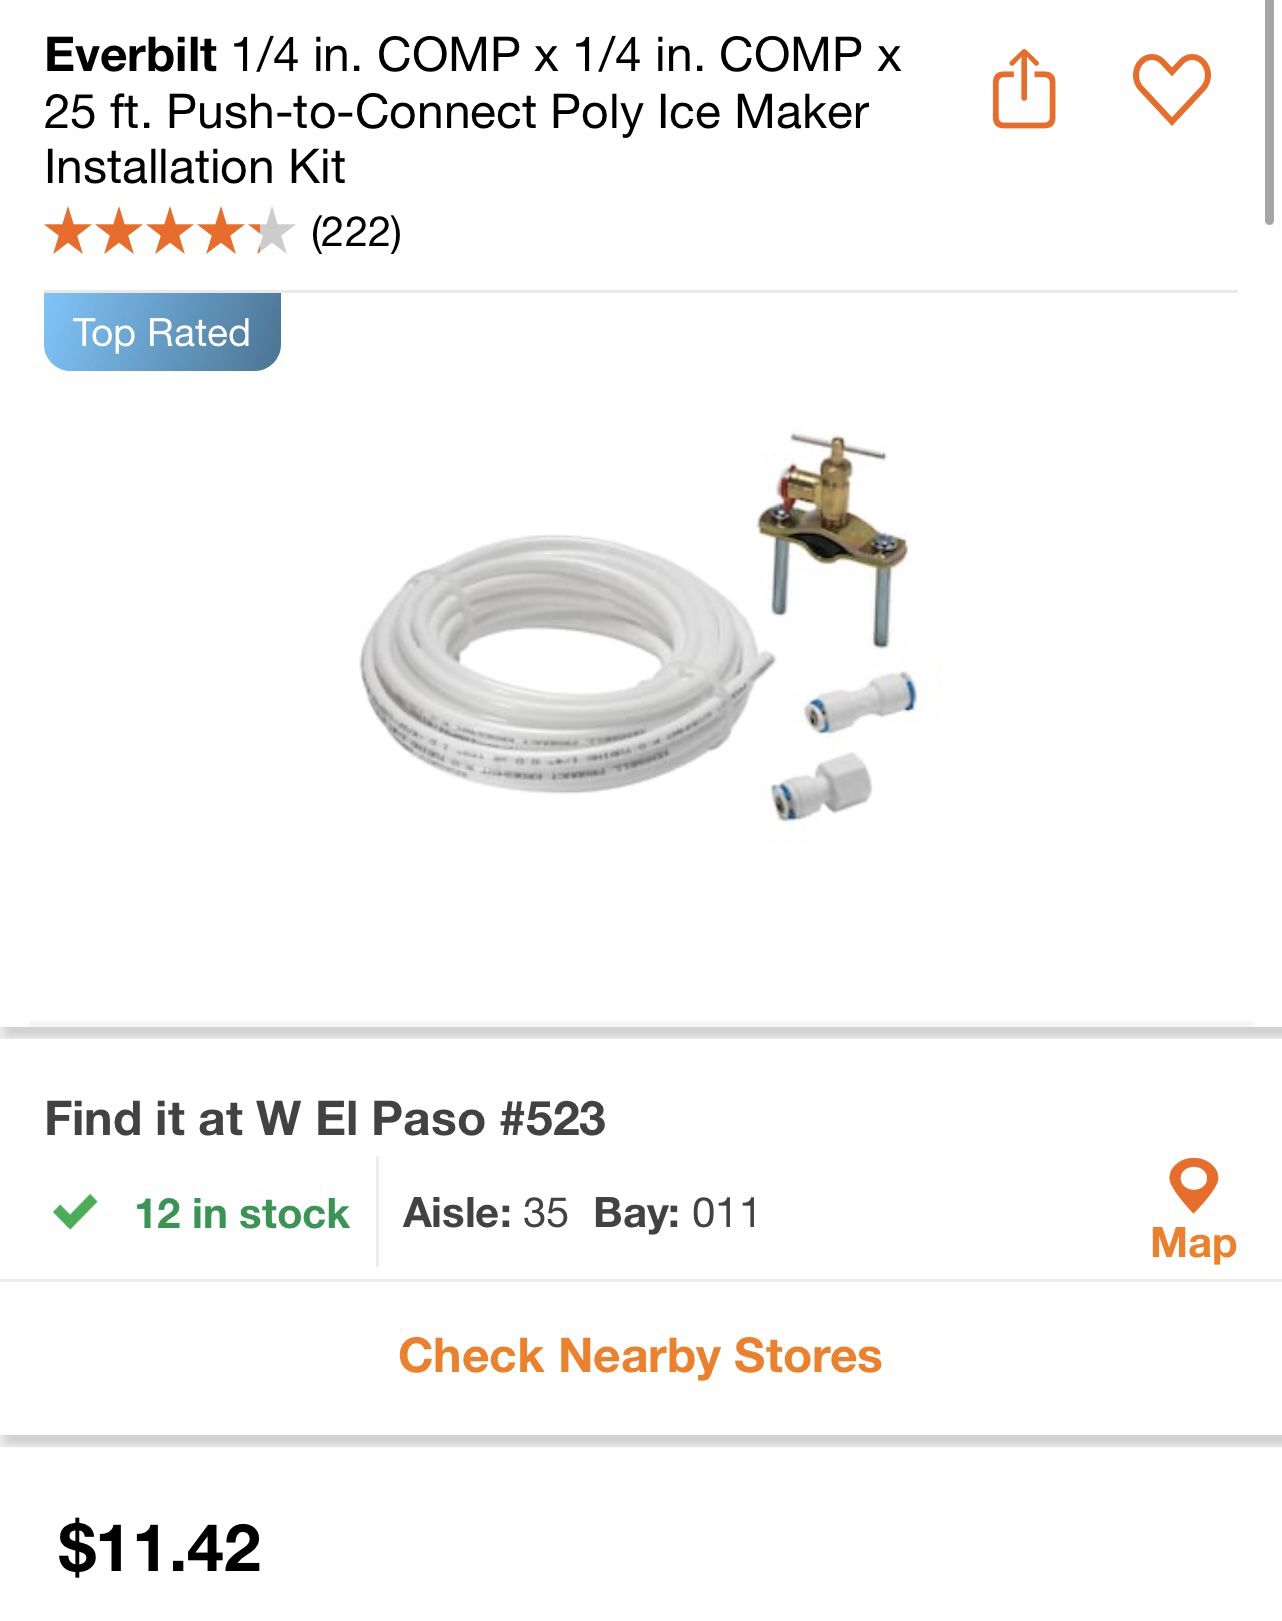 Everbilt 1/4 in. COMP x 1/4 in. COMP x 25 ft. Push-to-Connect Poly Ice  Maker Installation Kit for Sale in El Paso, TX - OfferUp